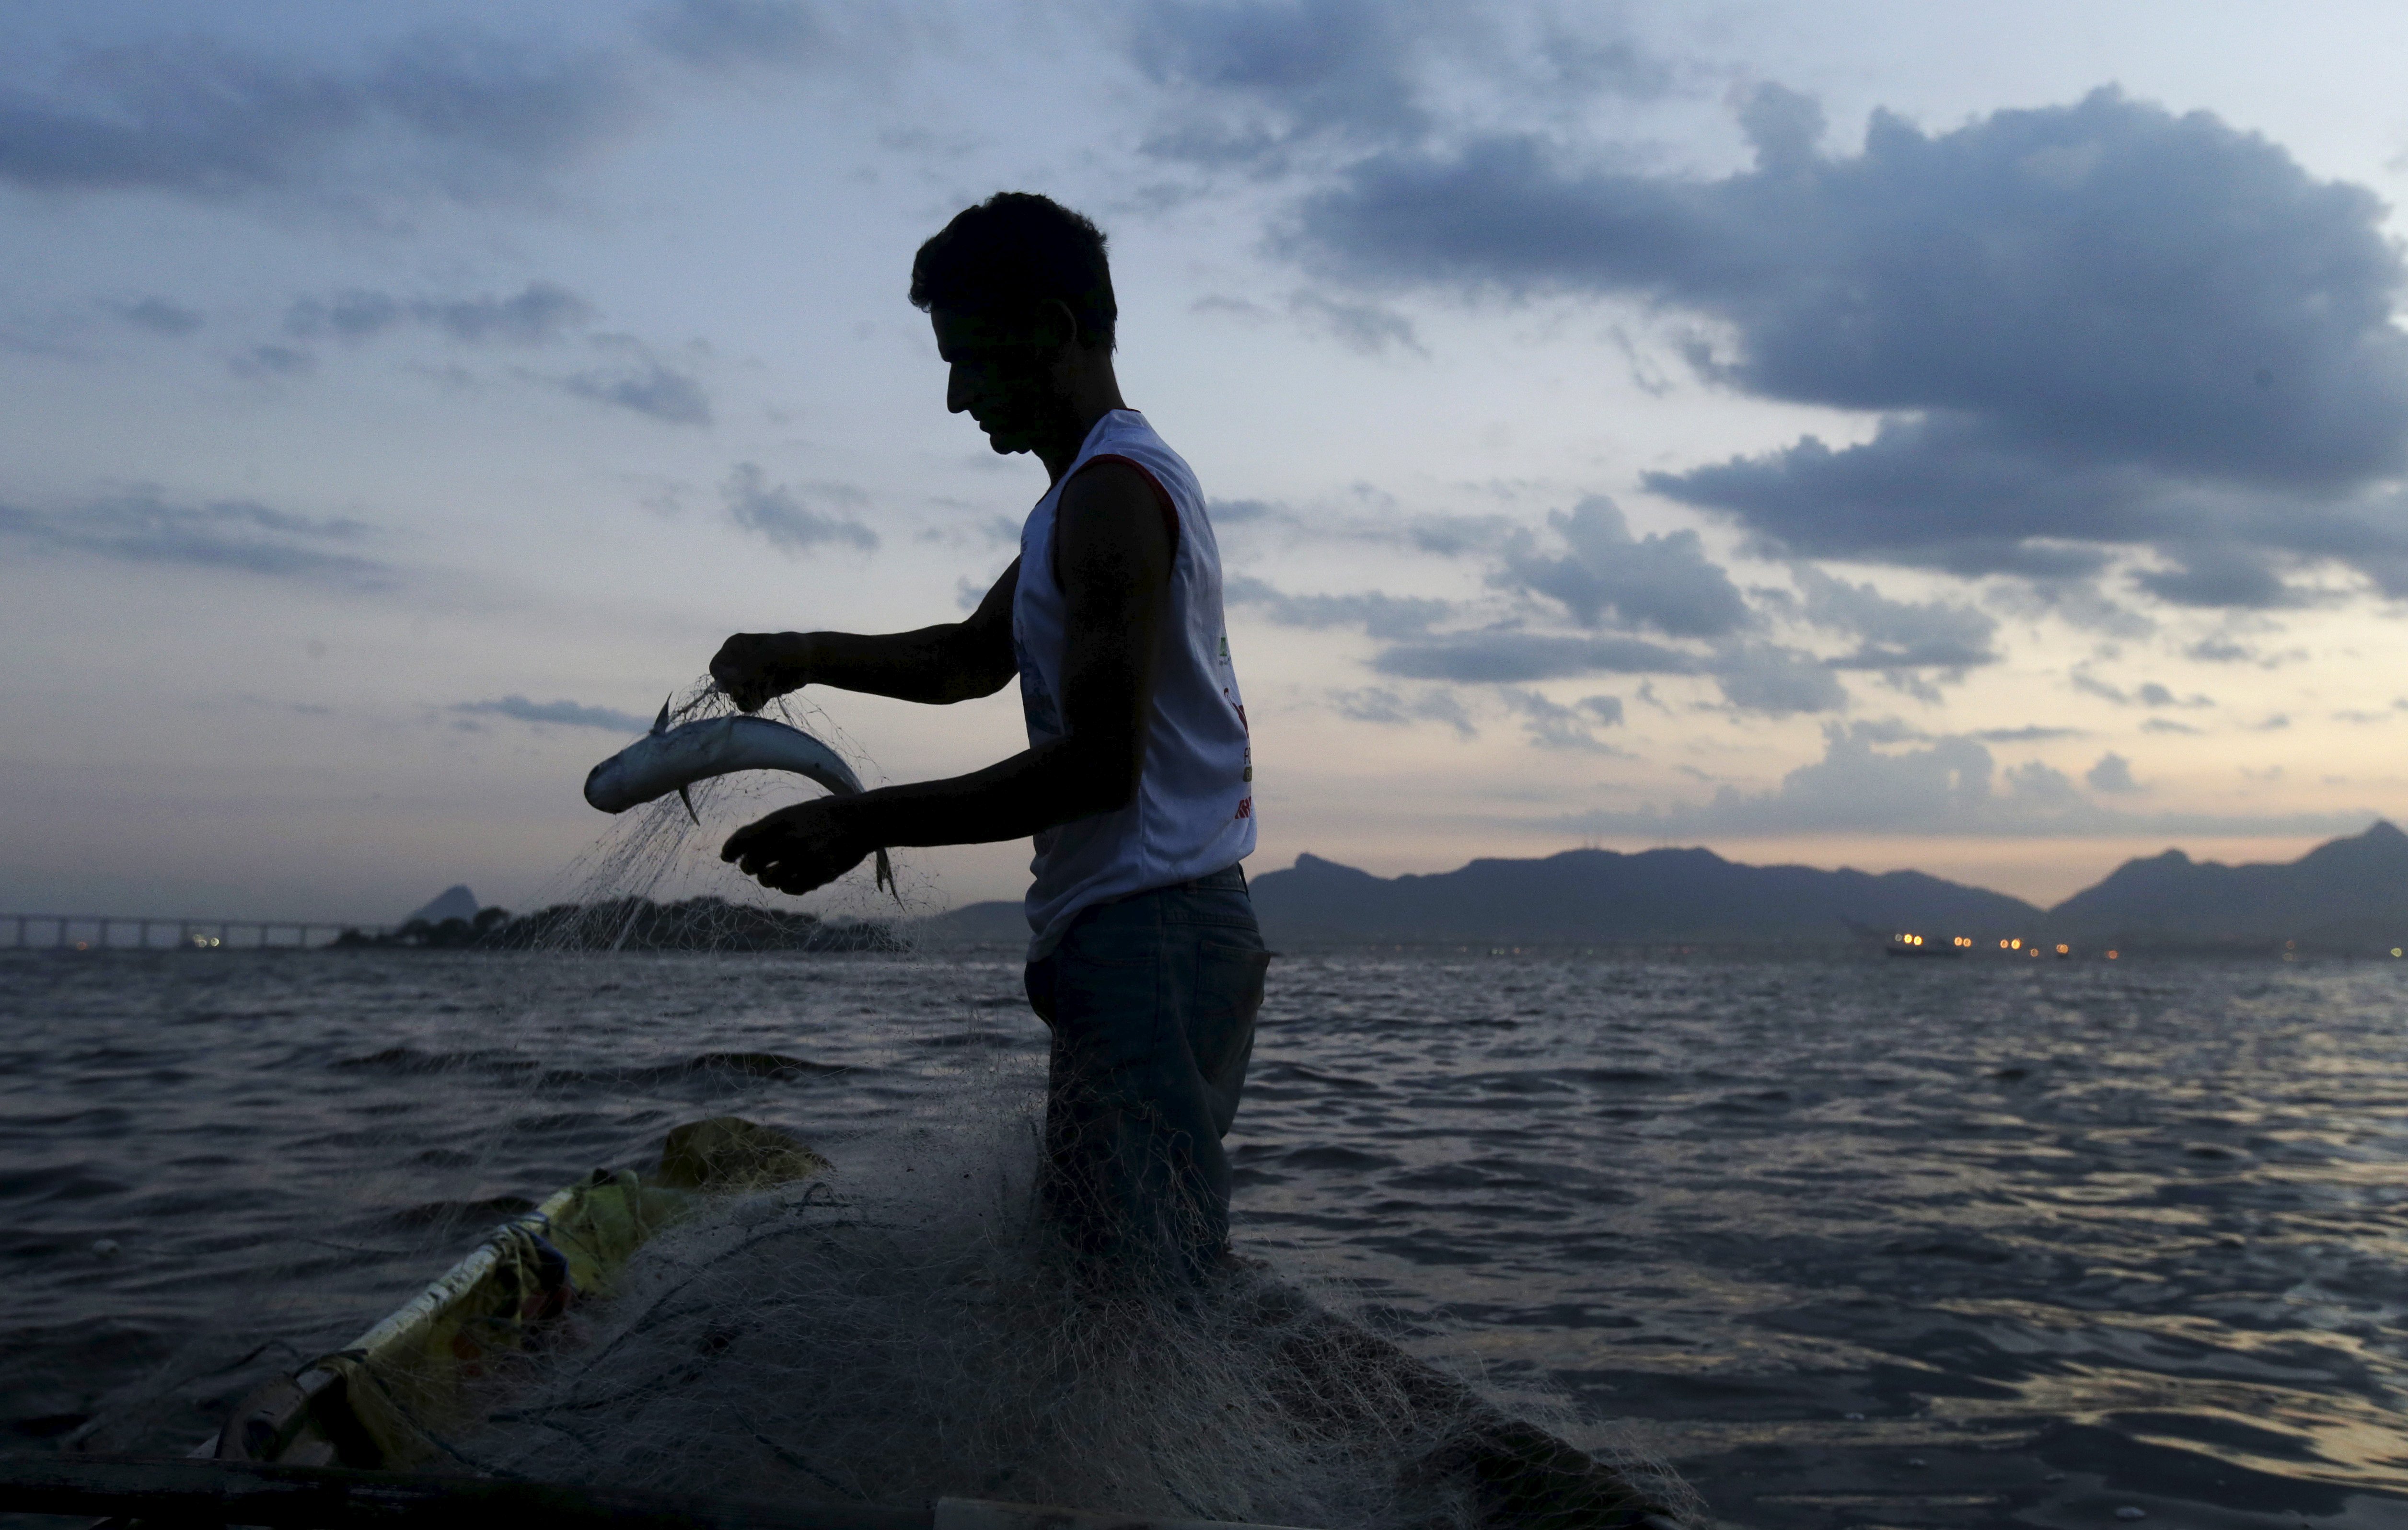 A fisherman holds a fish caught in his net in the waters of Guanabara Bay in Rio de Janeiro Jan. 8, 2016. (CNS photo/Ricardo Moraes, Reuters)